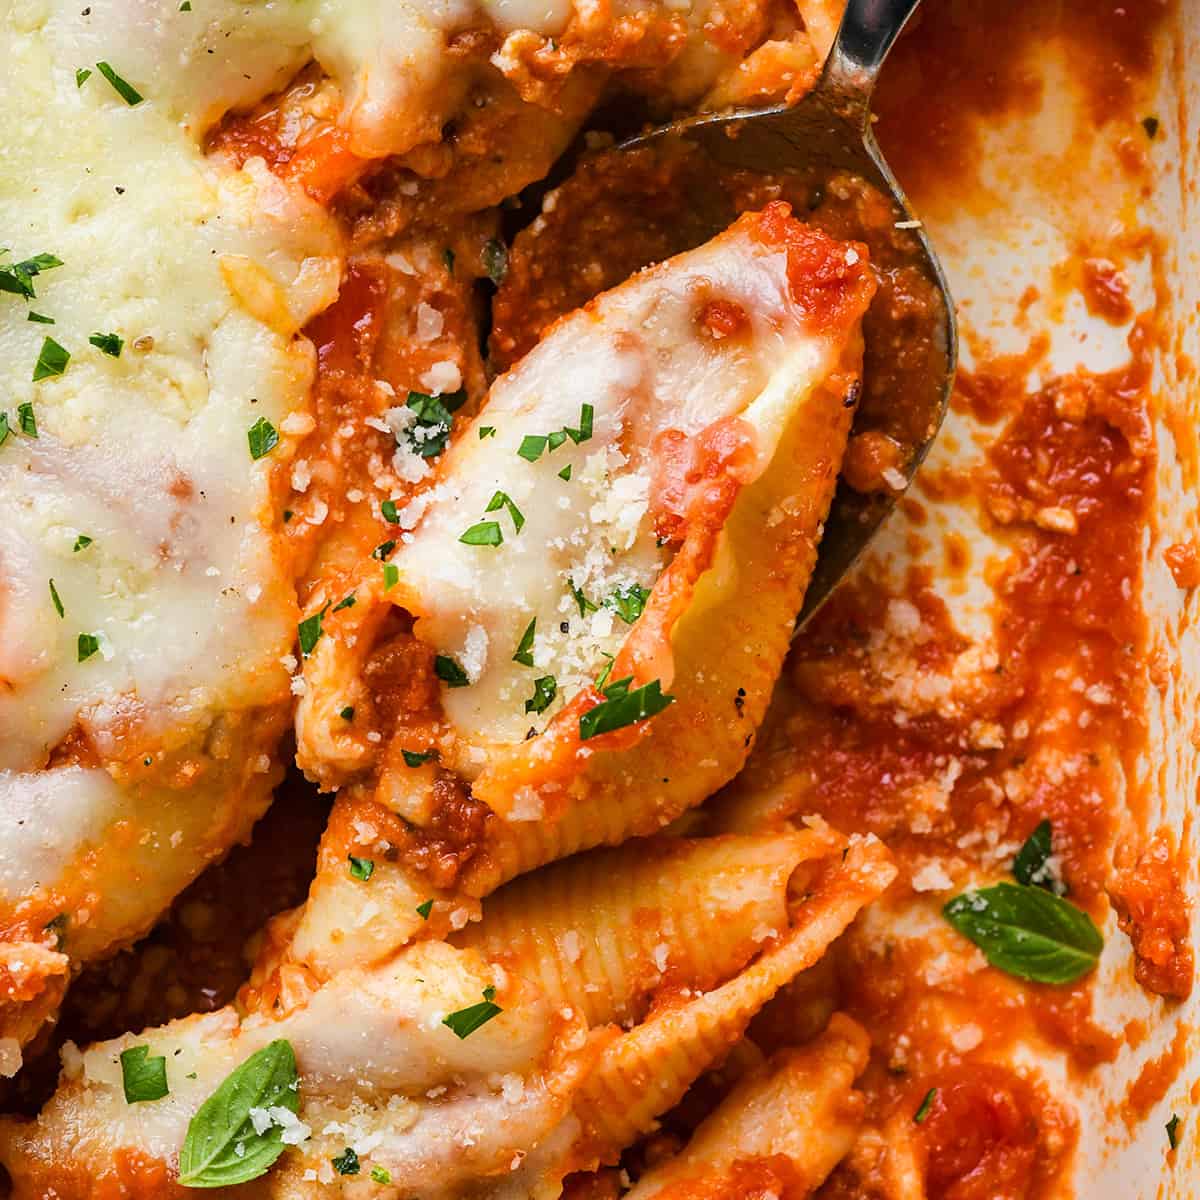 A spoon scooping Stuffed Shells out of a baking dish